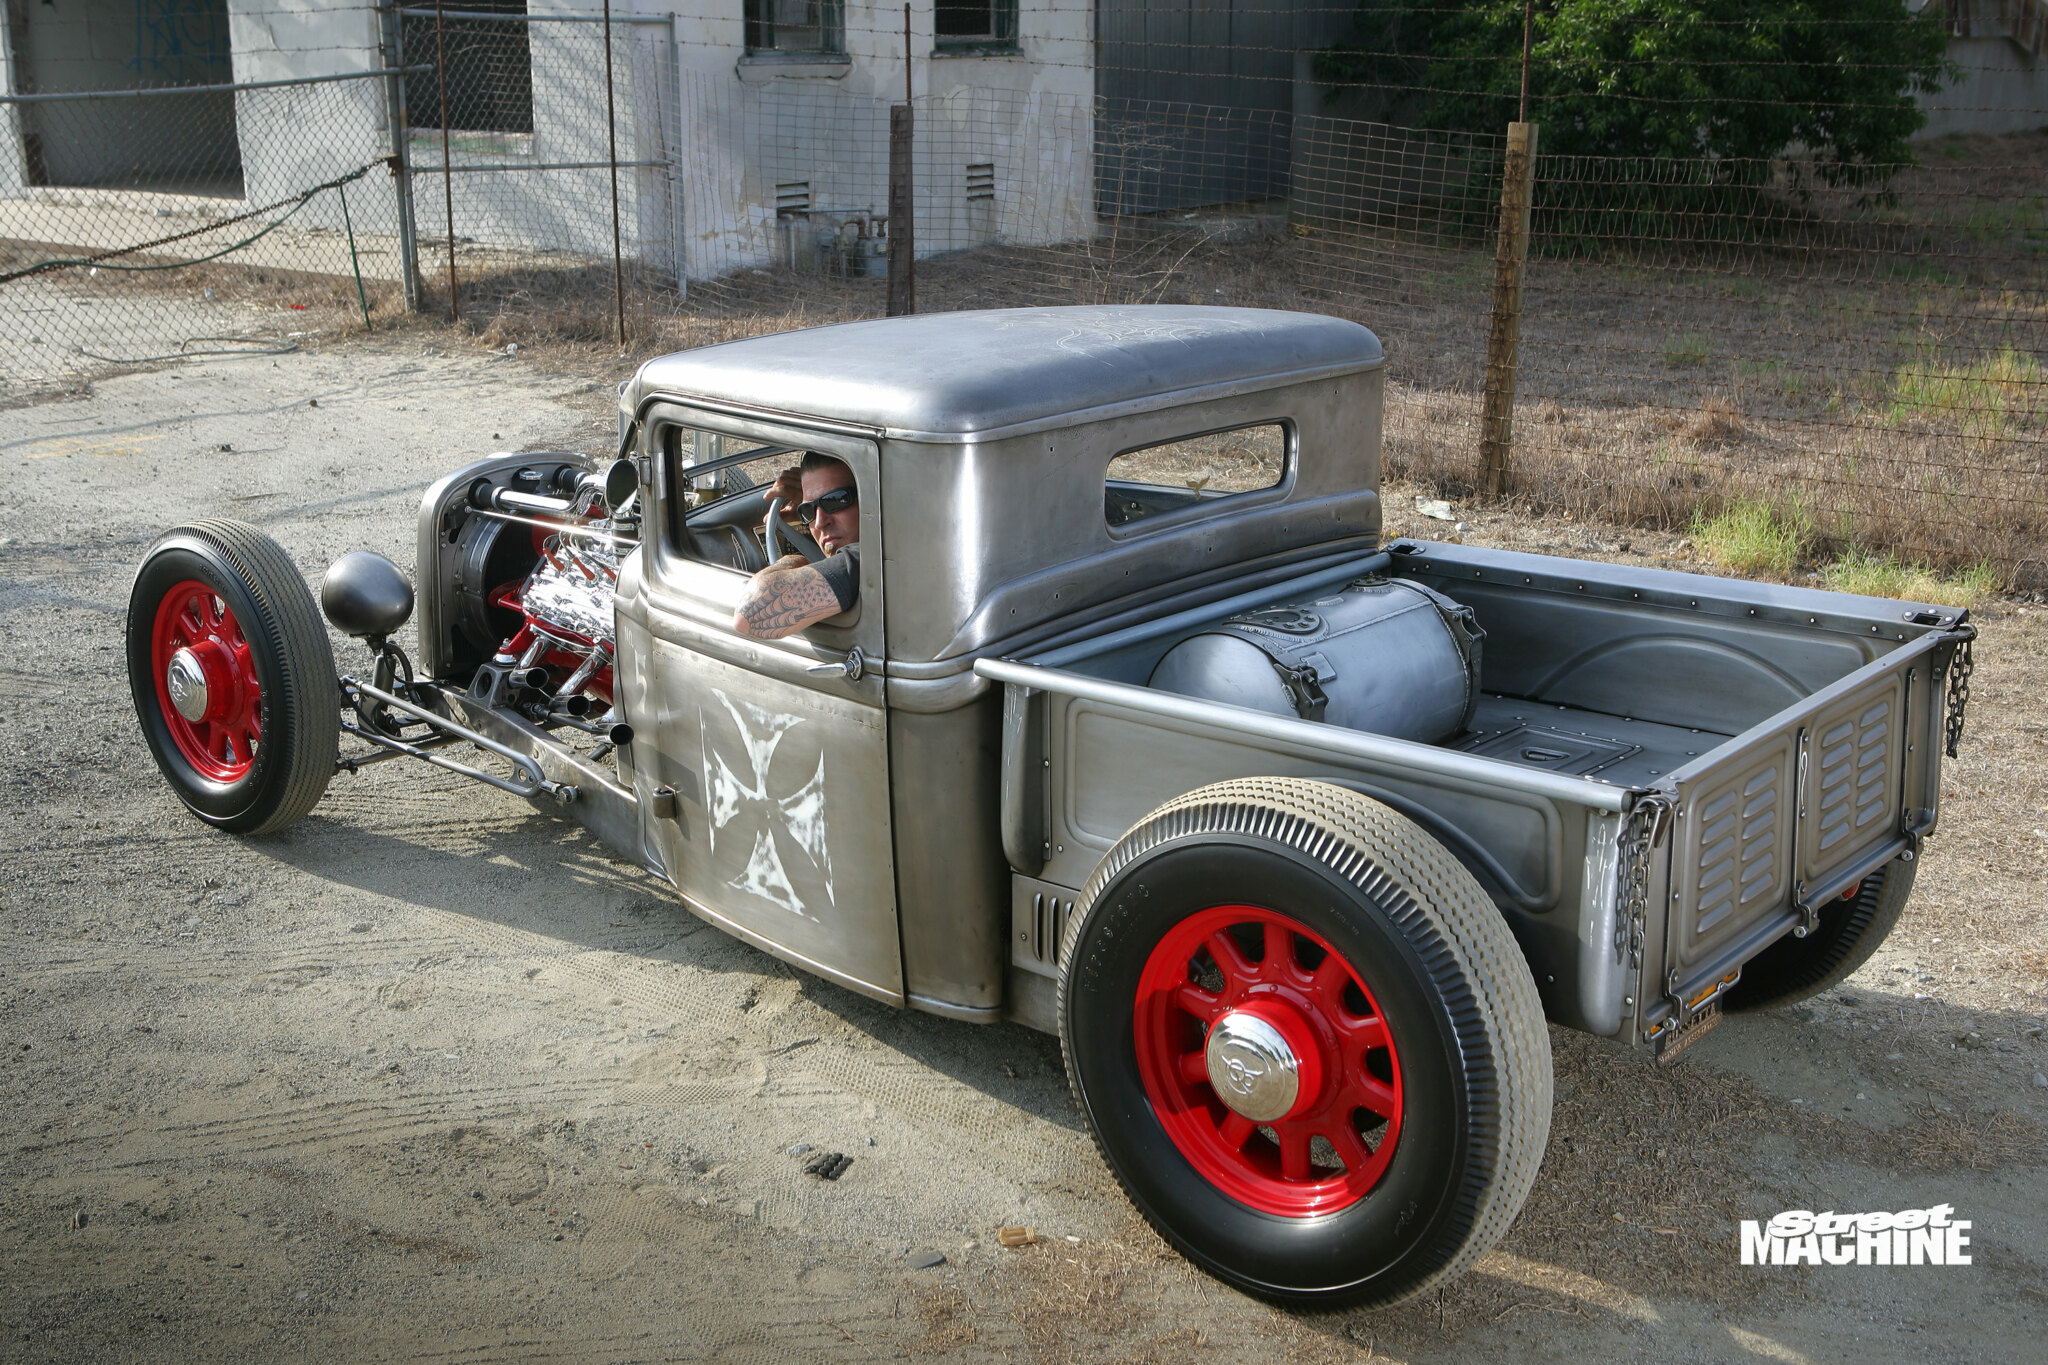 Jimmy Shine’s bare-metal 1934 Ford pick-up